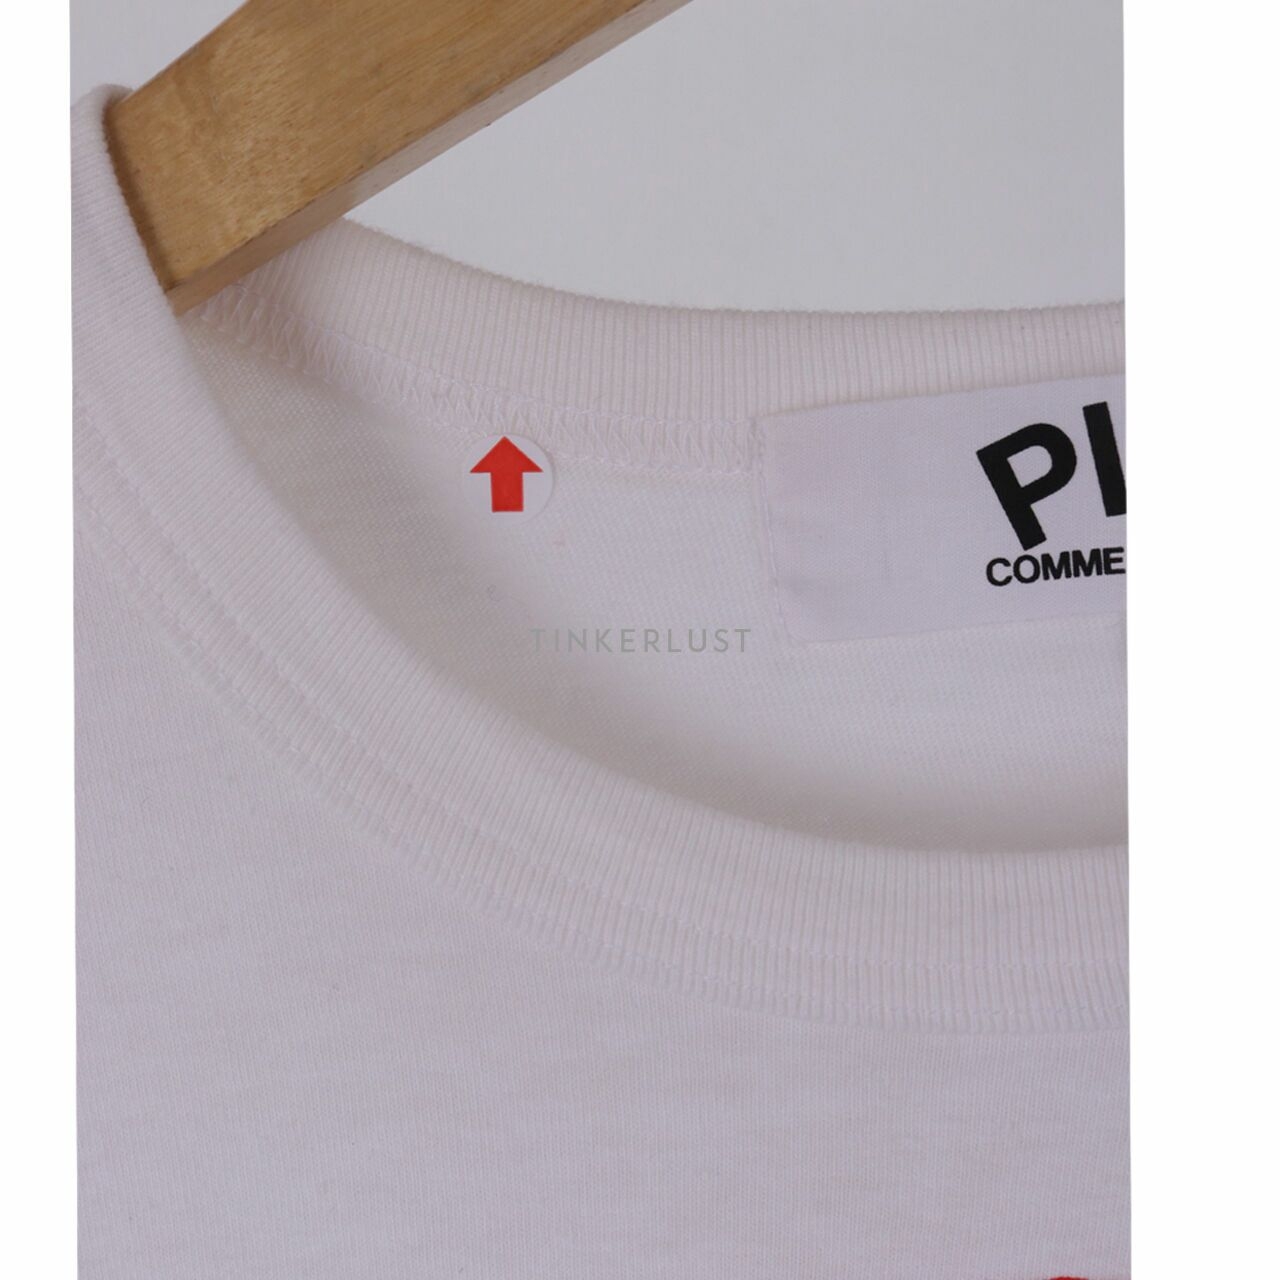 Play Comme des Garcons Inverse Red and Camouflage White T-shirt